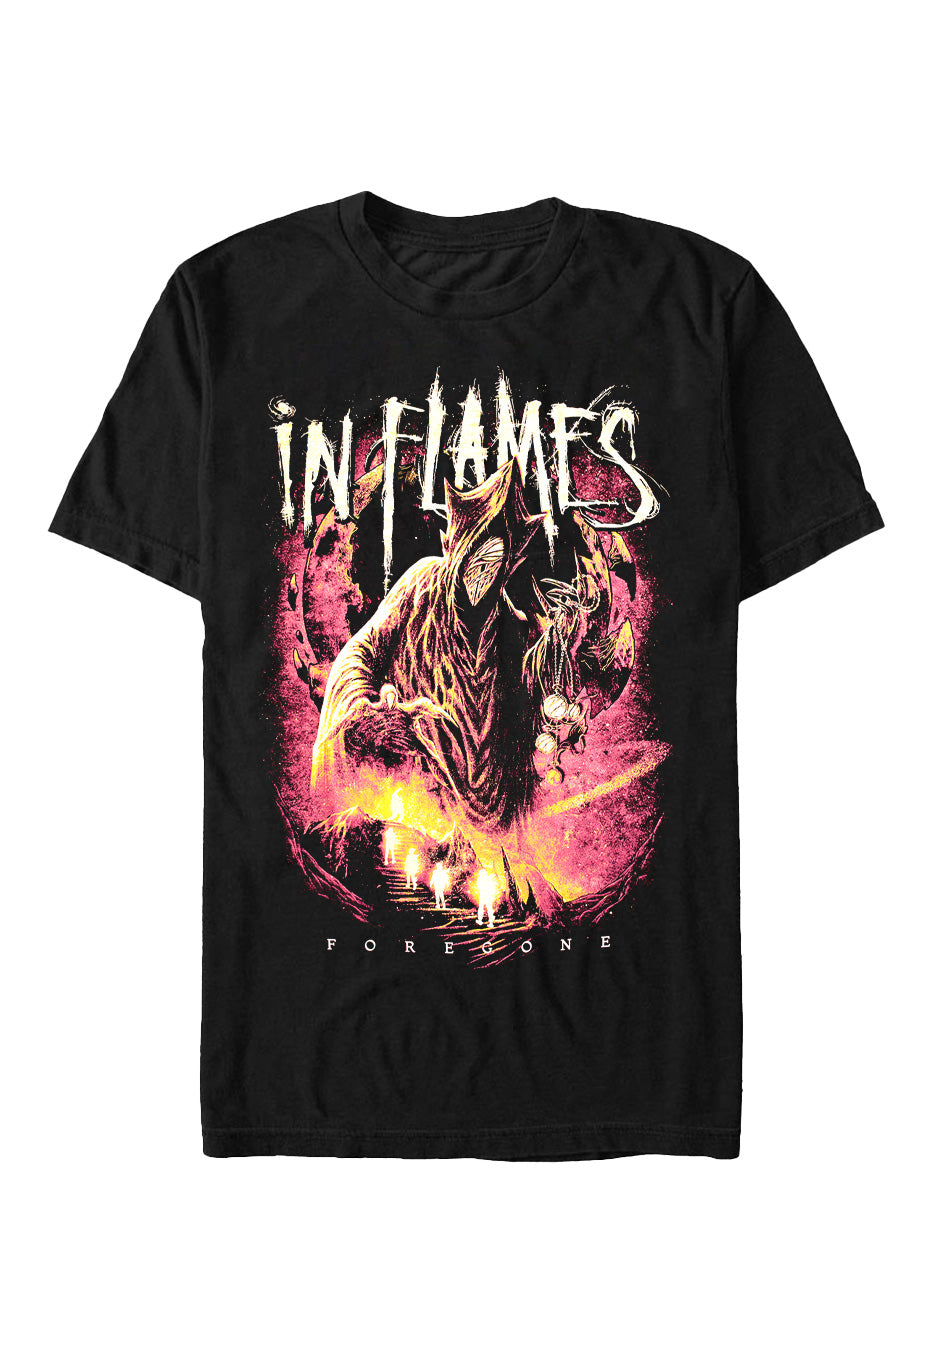 In Flames - Foregone Space - T-Shirt